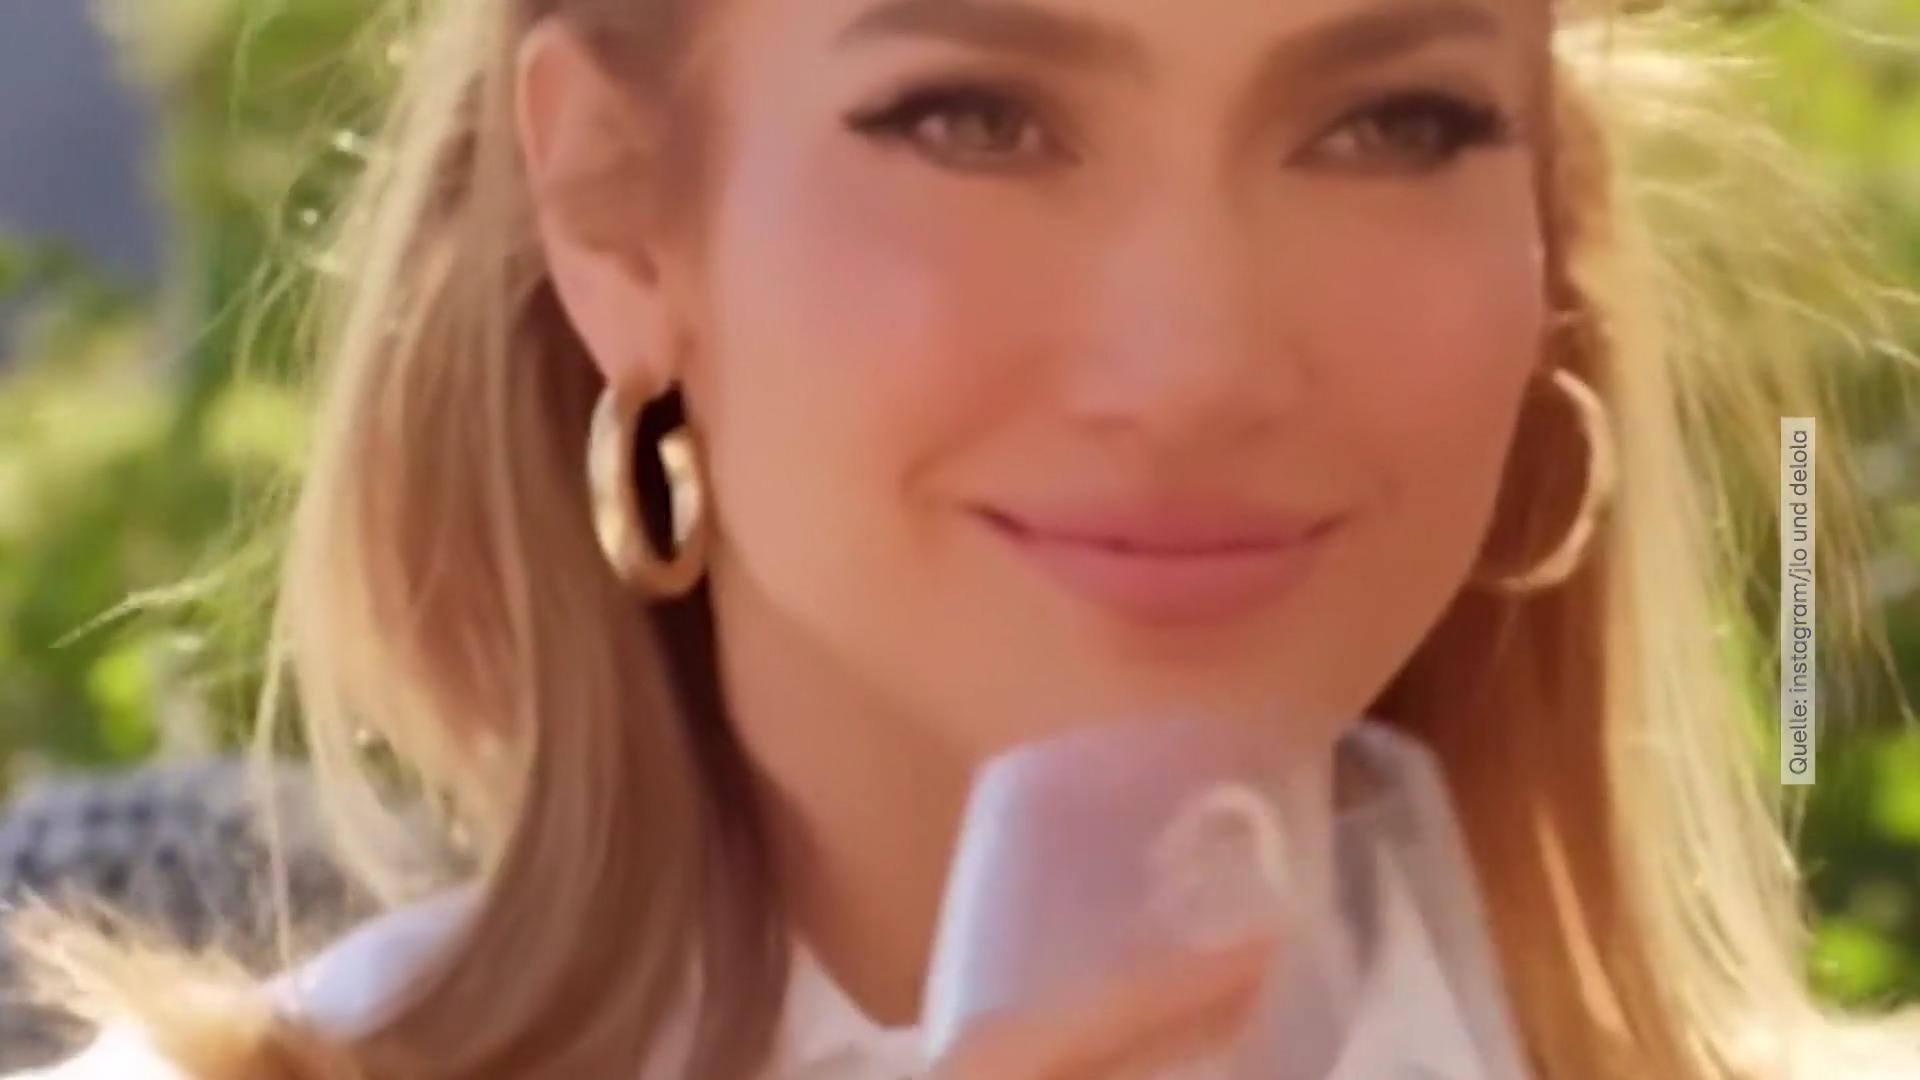 Does it really have to be, J.Lo?  Alcohol clip causes horror